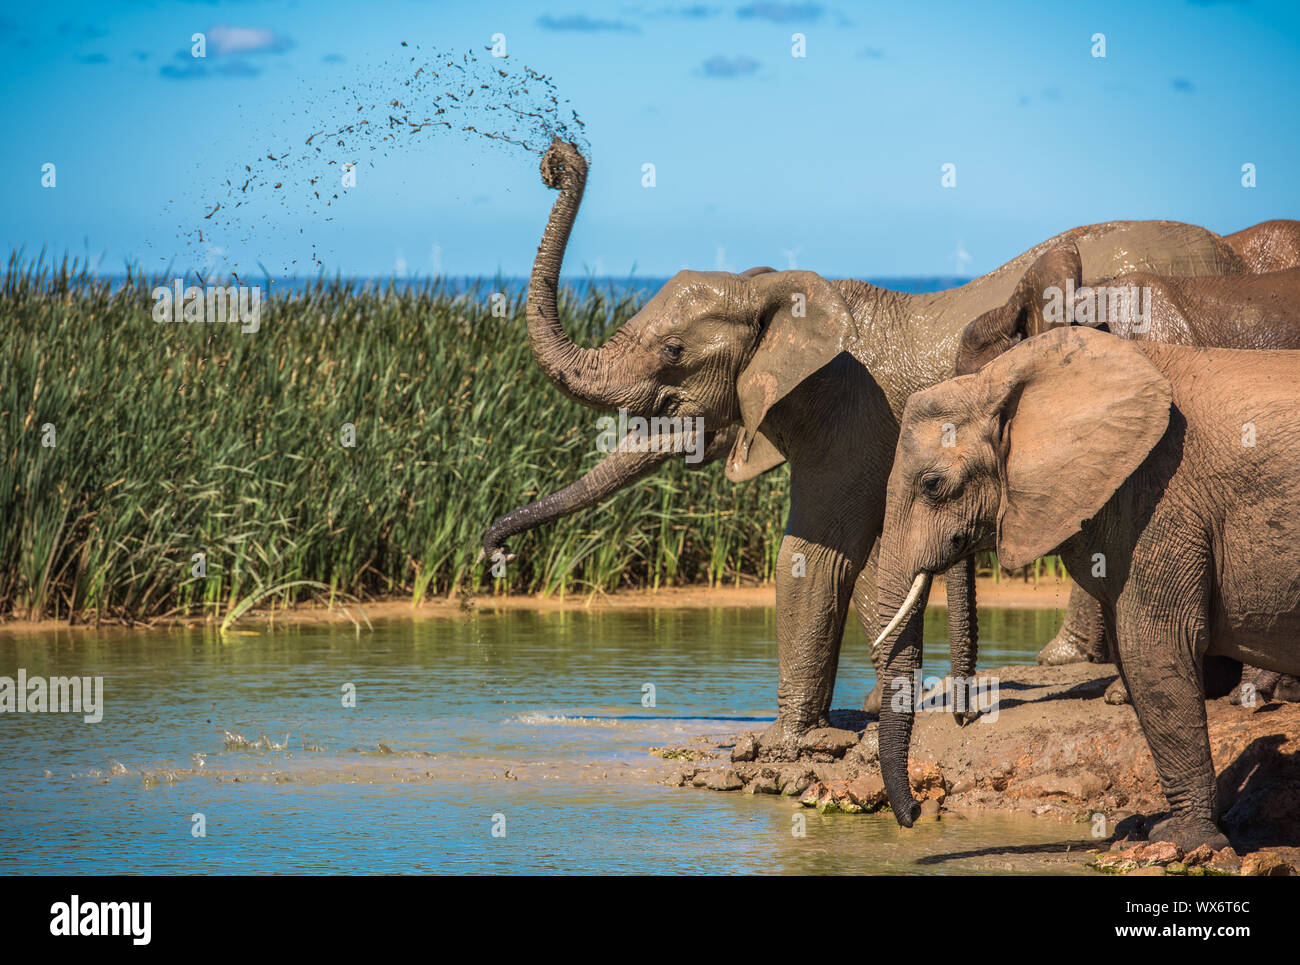 Elephant’s herd at water hole, South Africa Stock Photo